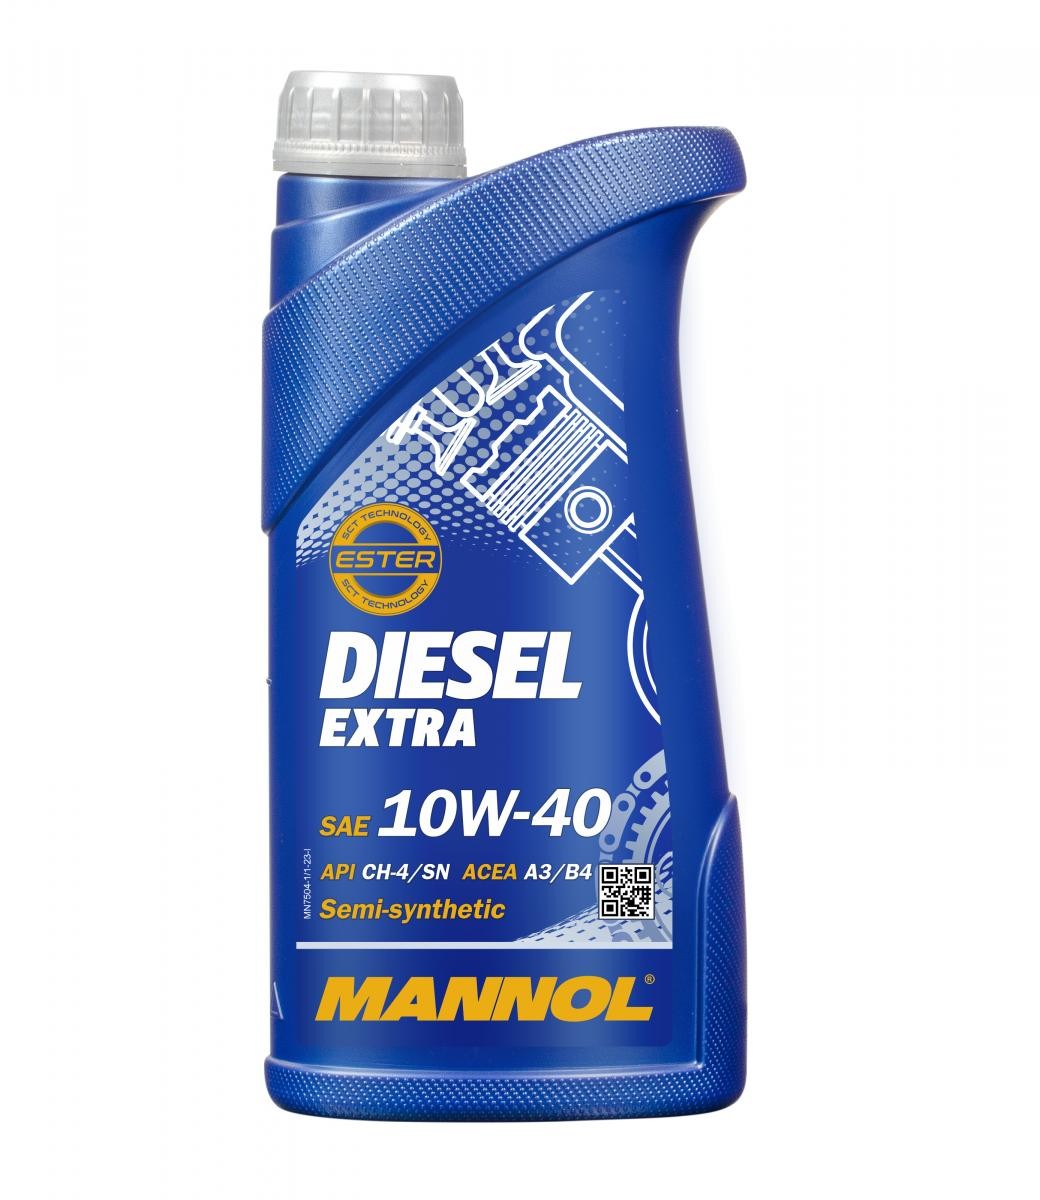 Engine oil MN7504-1 MANNOL DIESEL EXTRA 10W-40, 1l, Part Synthetic Oil